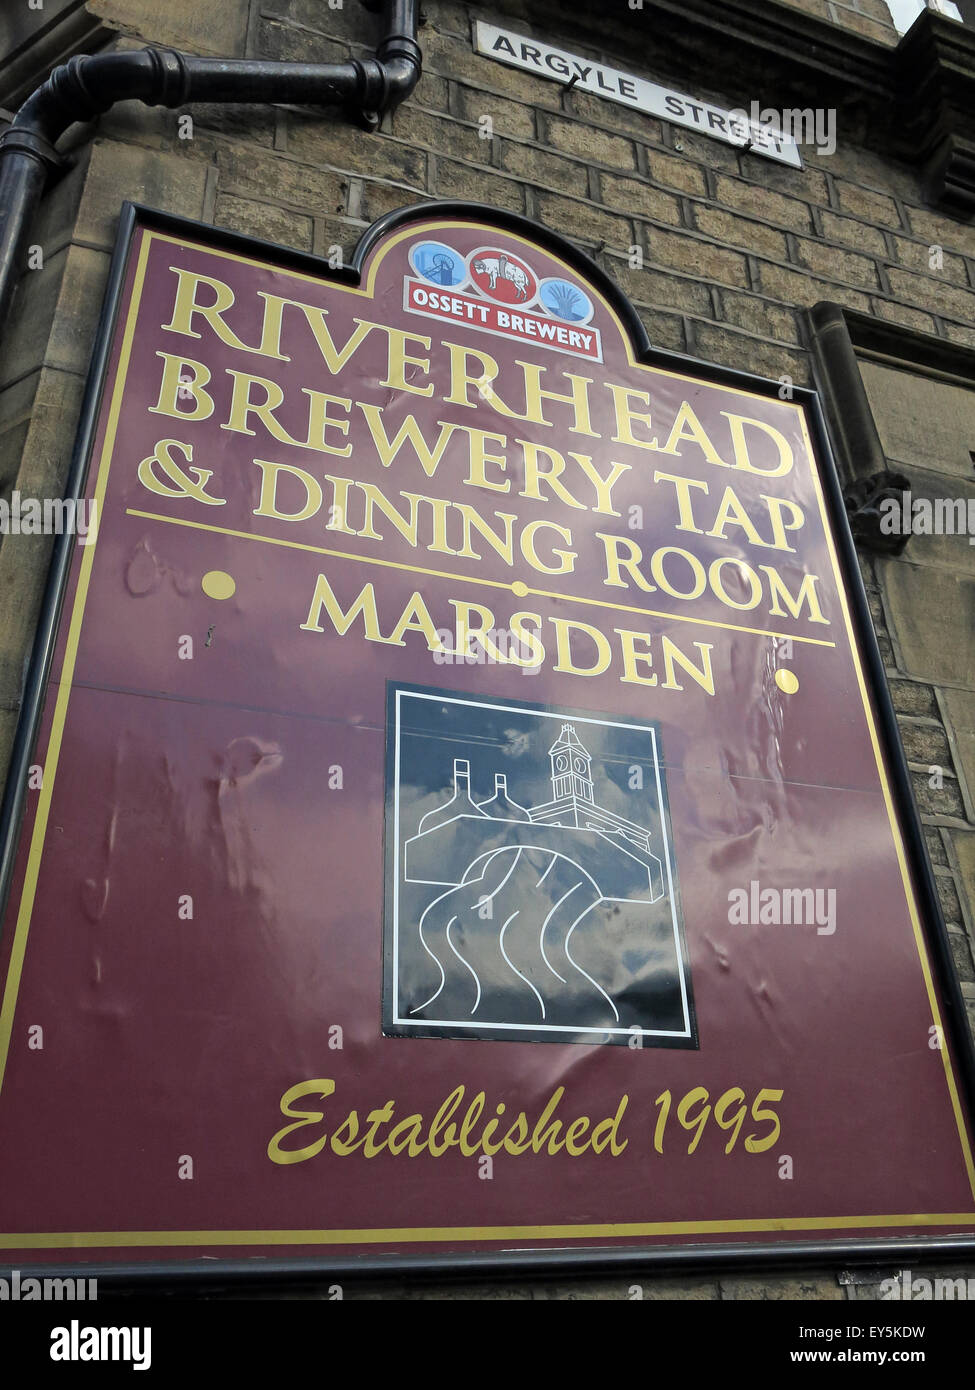 Riverhead Brewery Pub Marsden, West Yorkshire, England, Uk on the CAMRA aletrain route Stock Photo